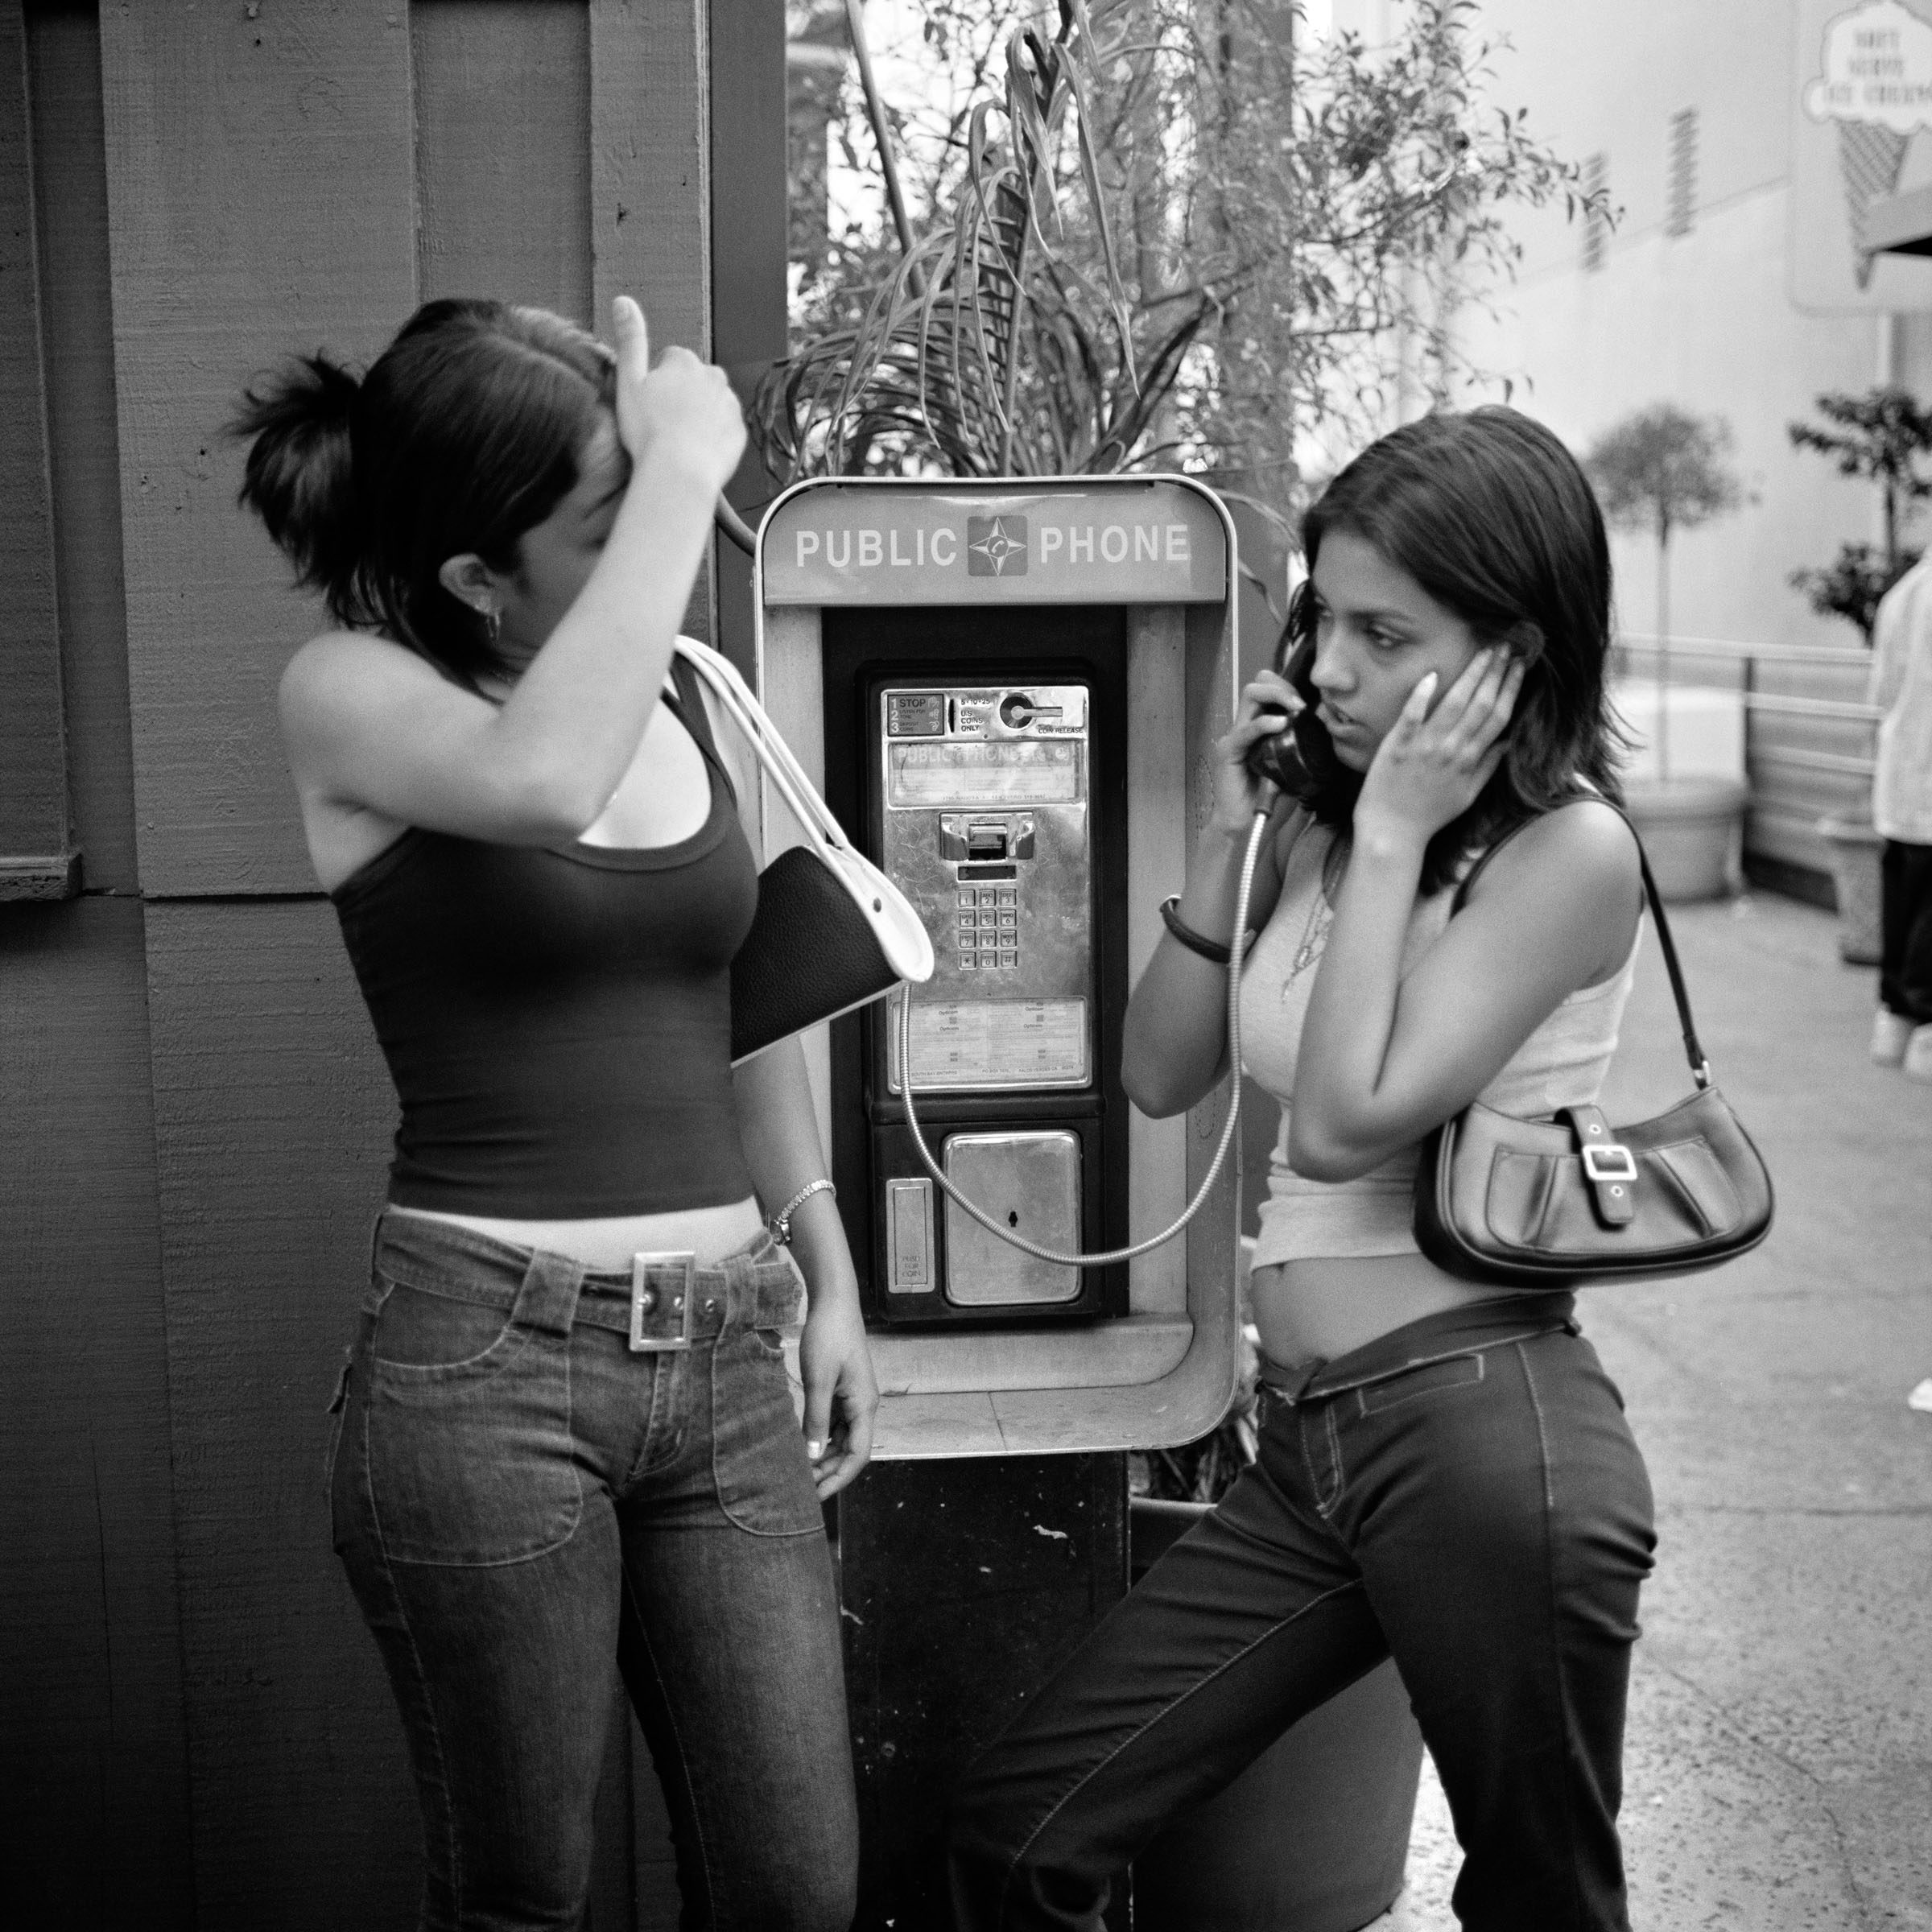 THE VILLAGE #29 TEEN GIRLS ON A PAYPHONE by Deanna Templeton, Obscura Curated Commission